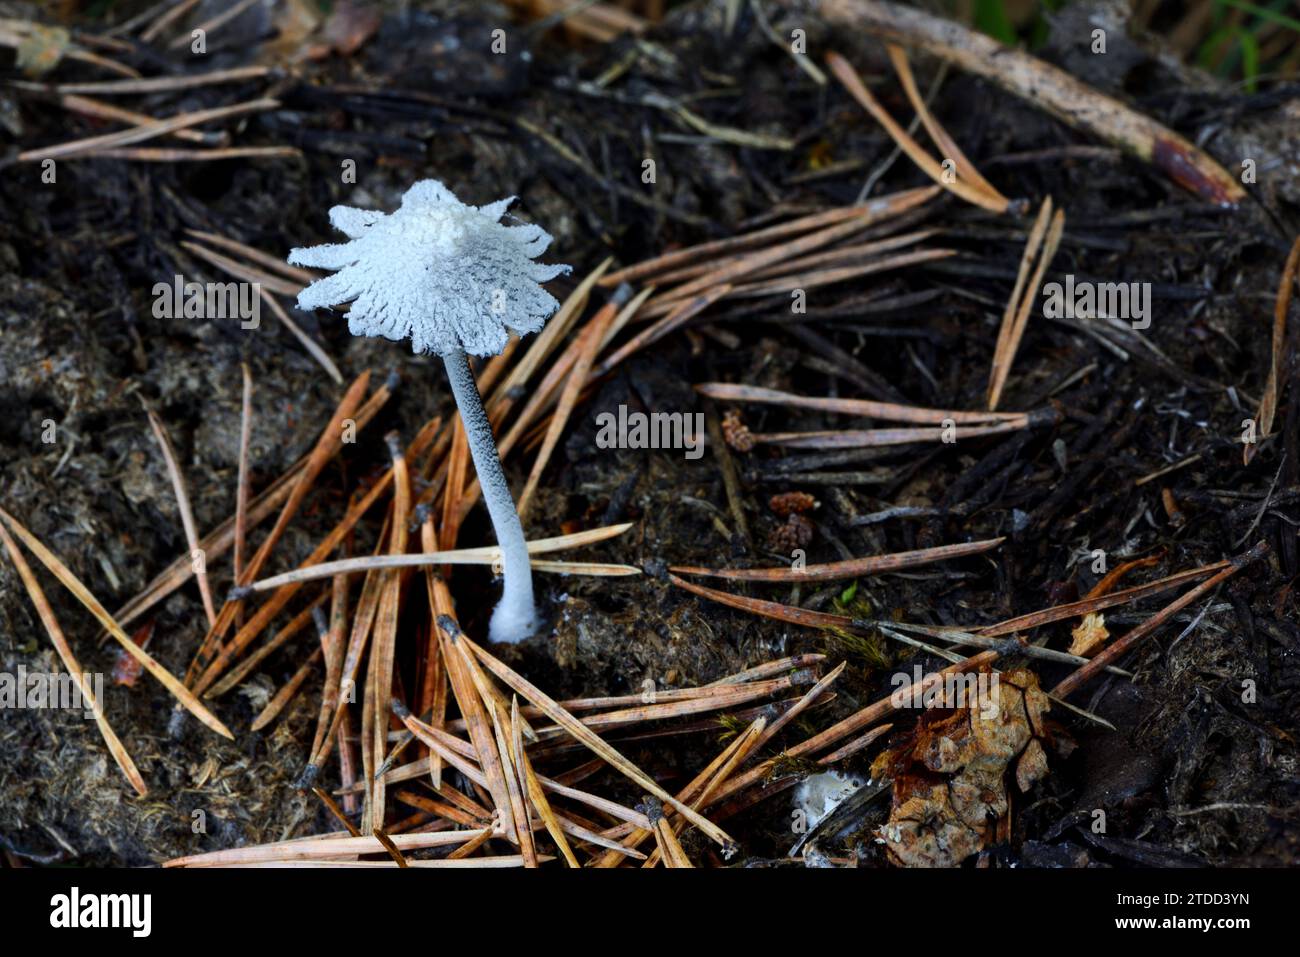 Coprinopsis nivea or Snowy Inkcap Mushroom Growing on Old Cow Dung Sprinkled with Pine Needles Stock Photo